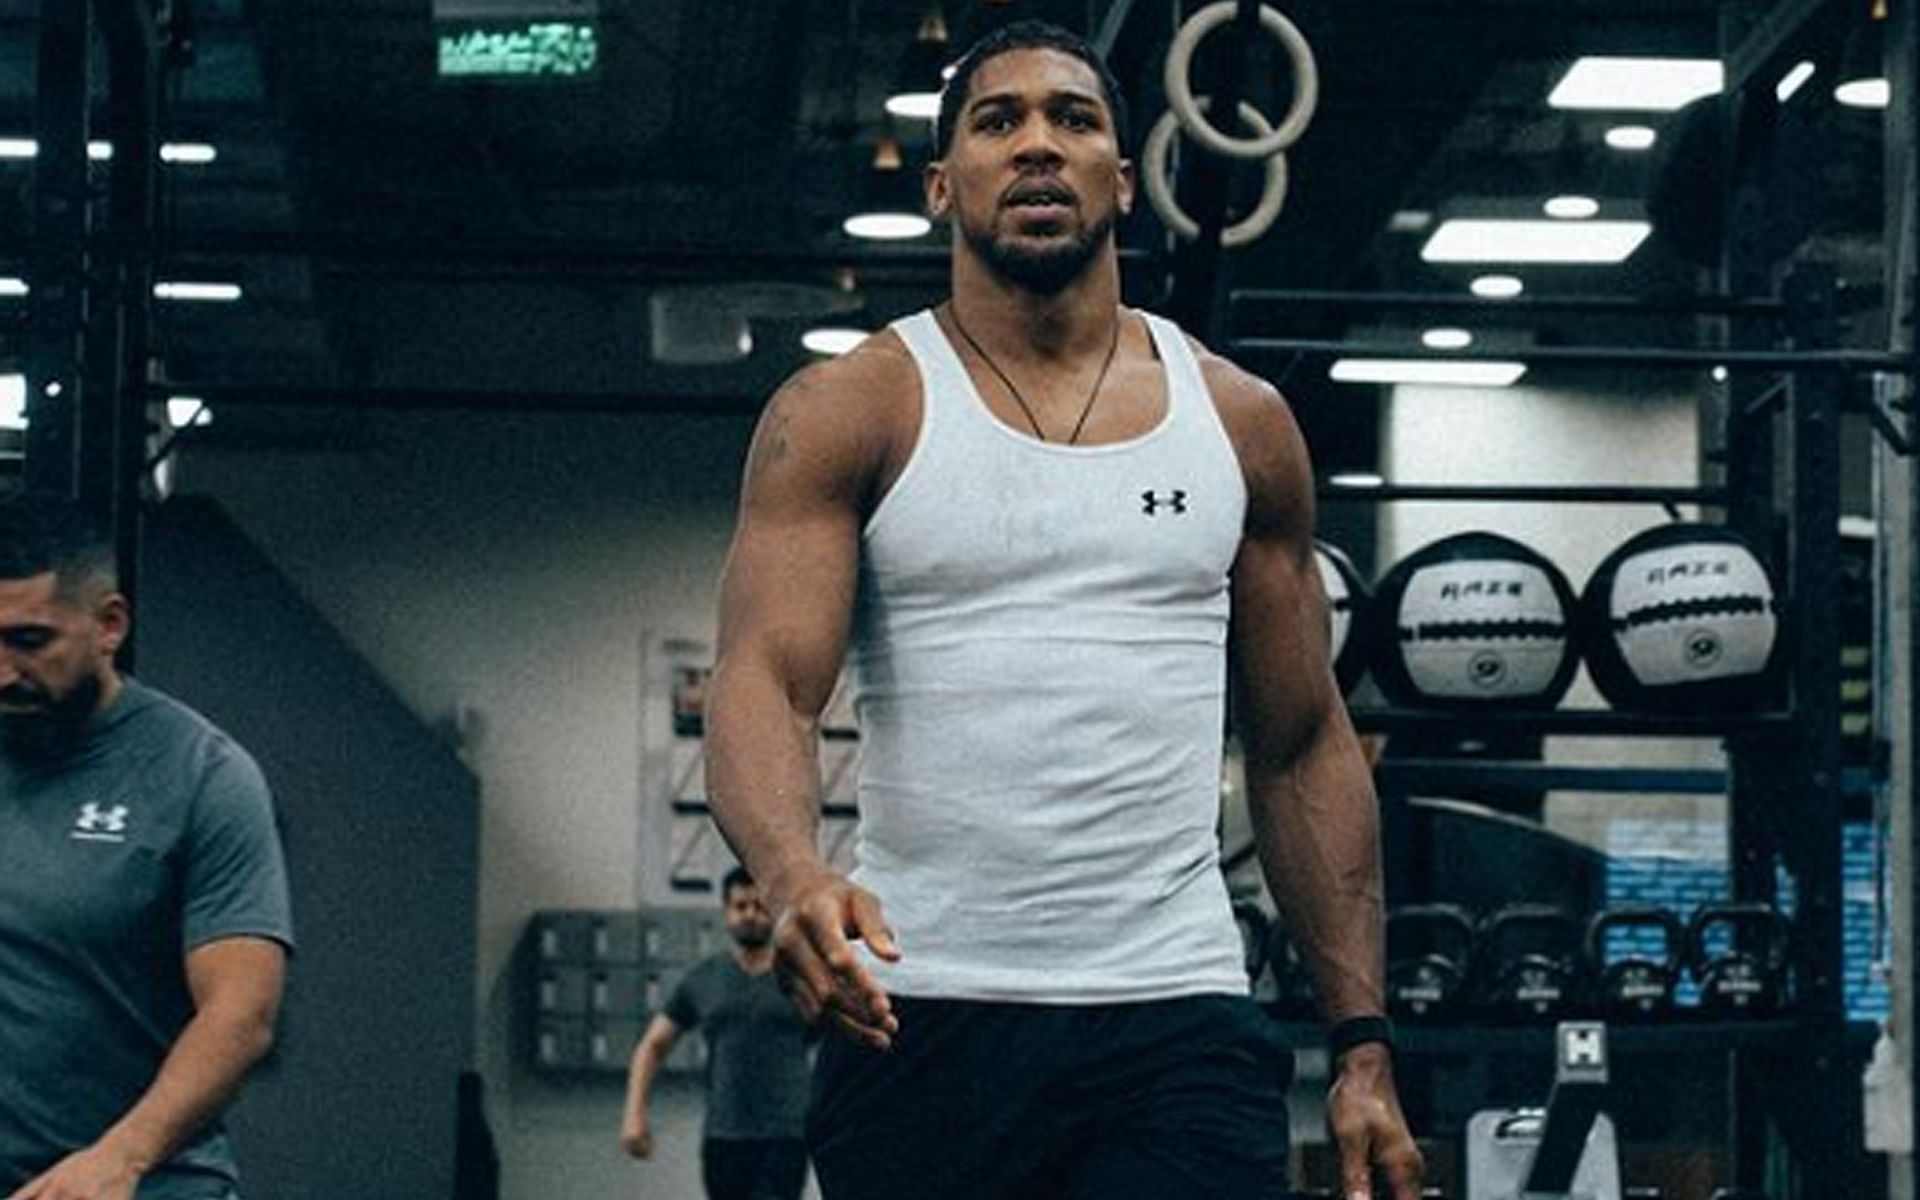 Anthony Joshua received a lot of praise for his performance against Otto Wallin last December [Image Courtesy: @anthonyjoshua Instagram]